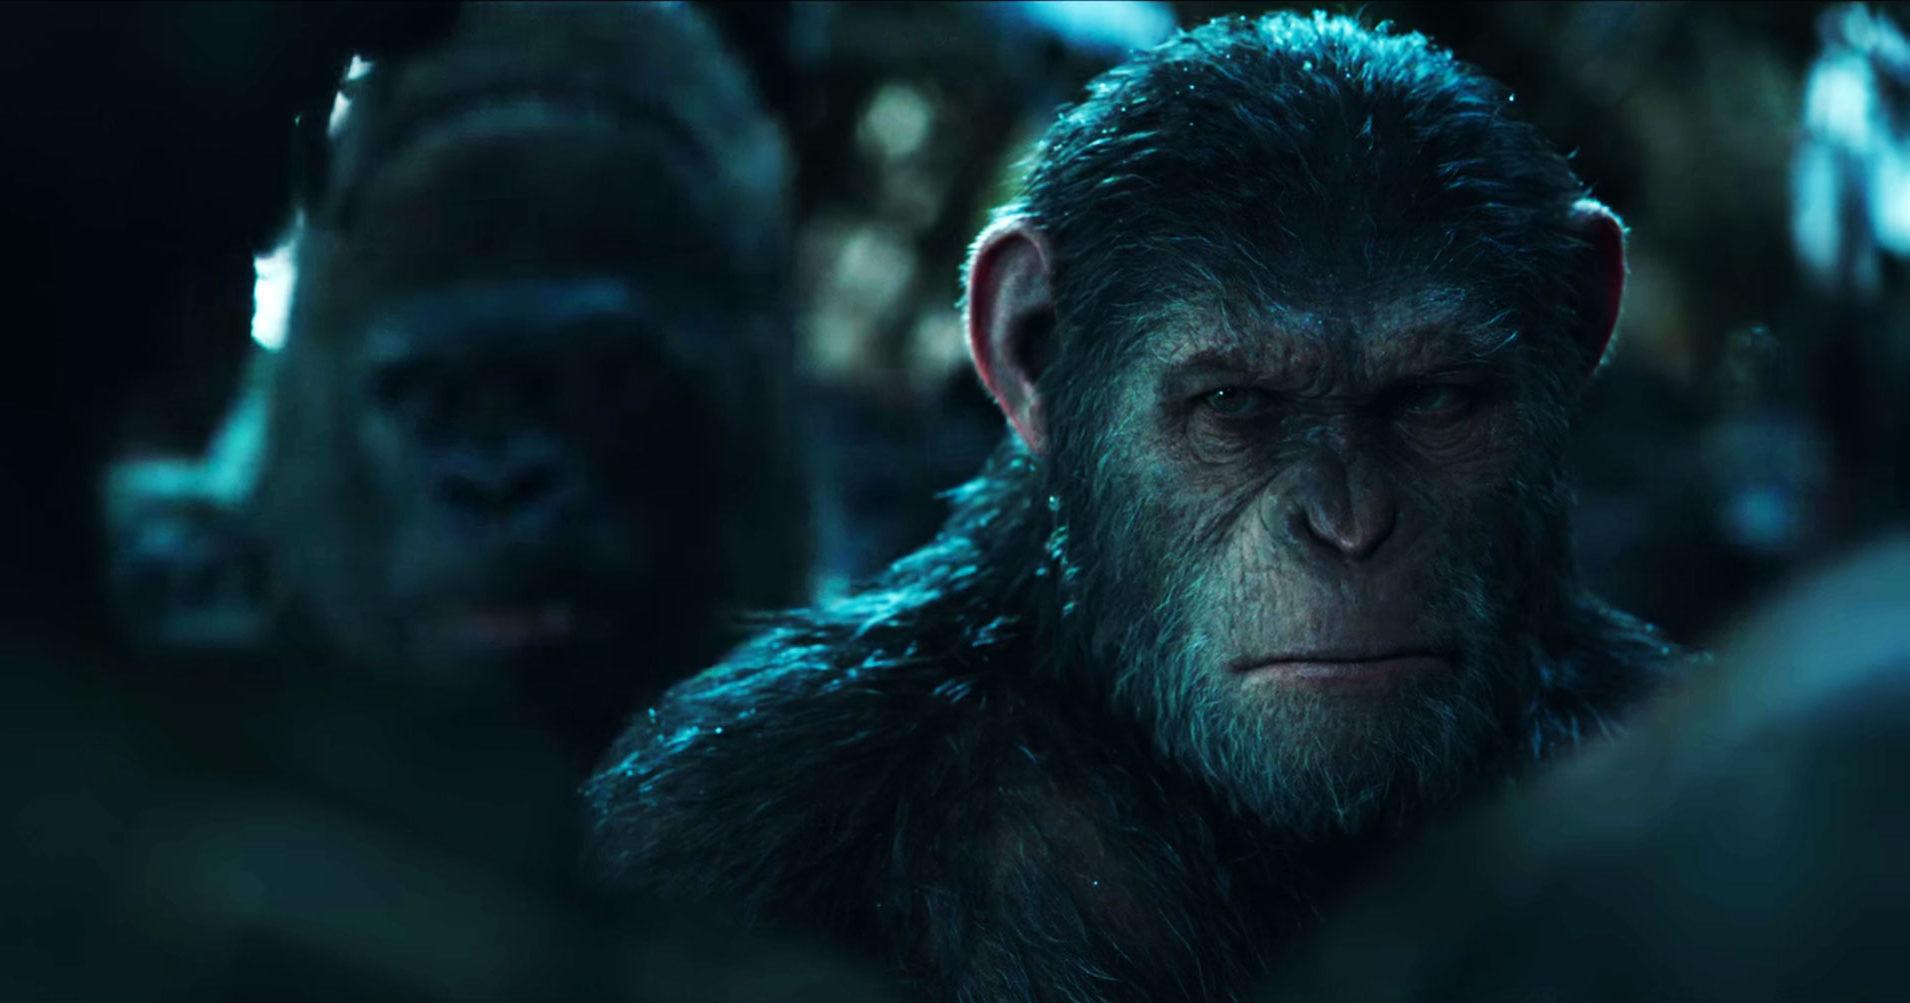 Review: War for the Planet of the Apes (2017)